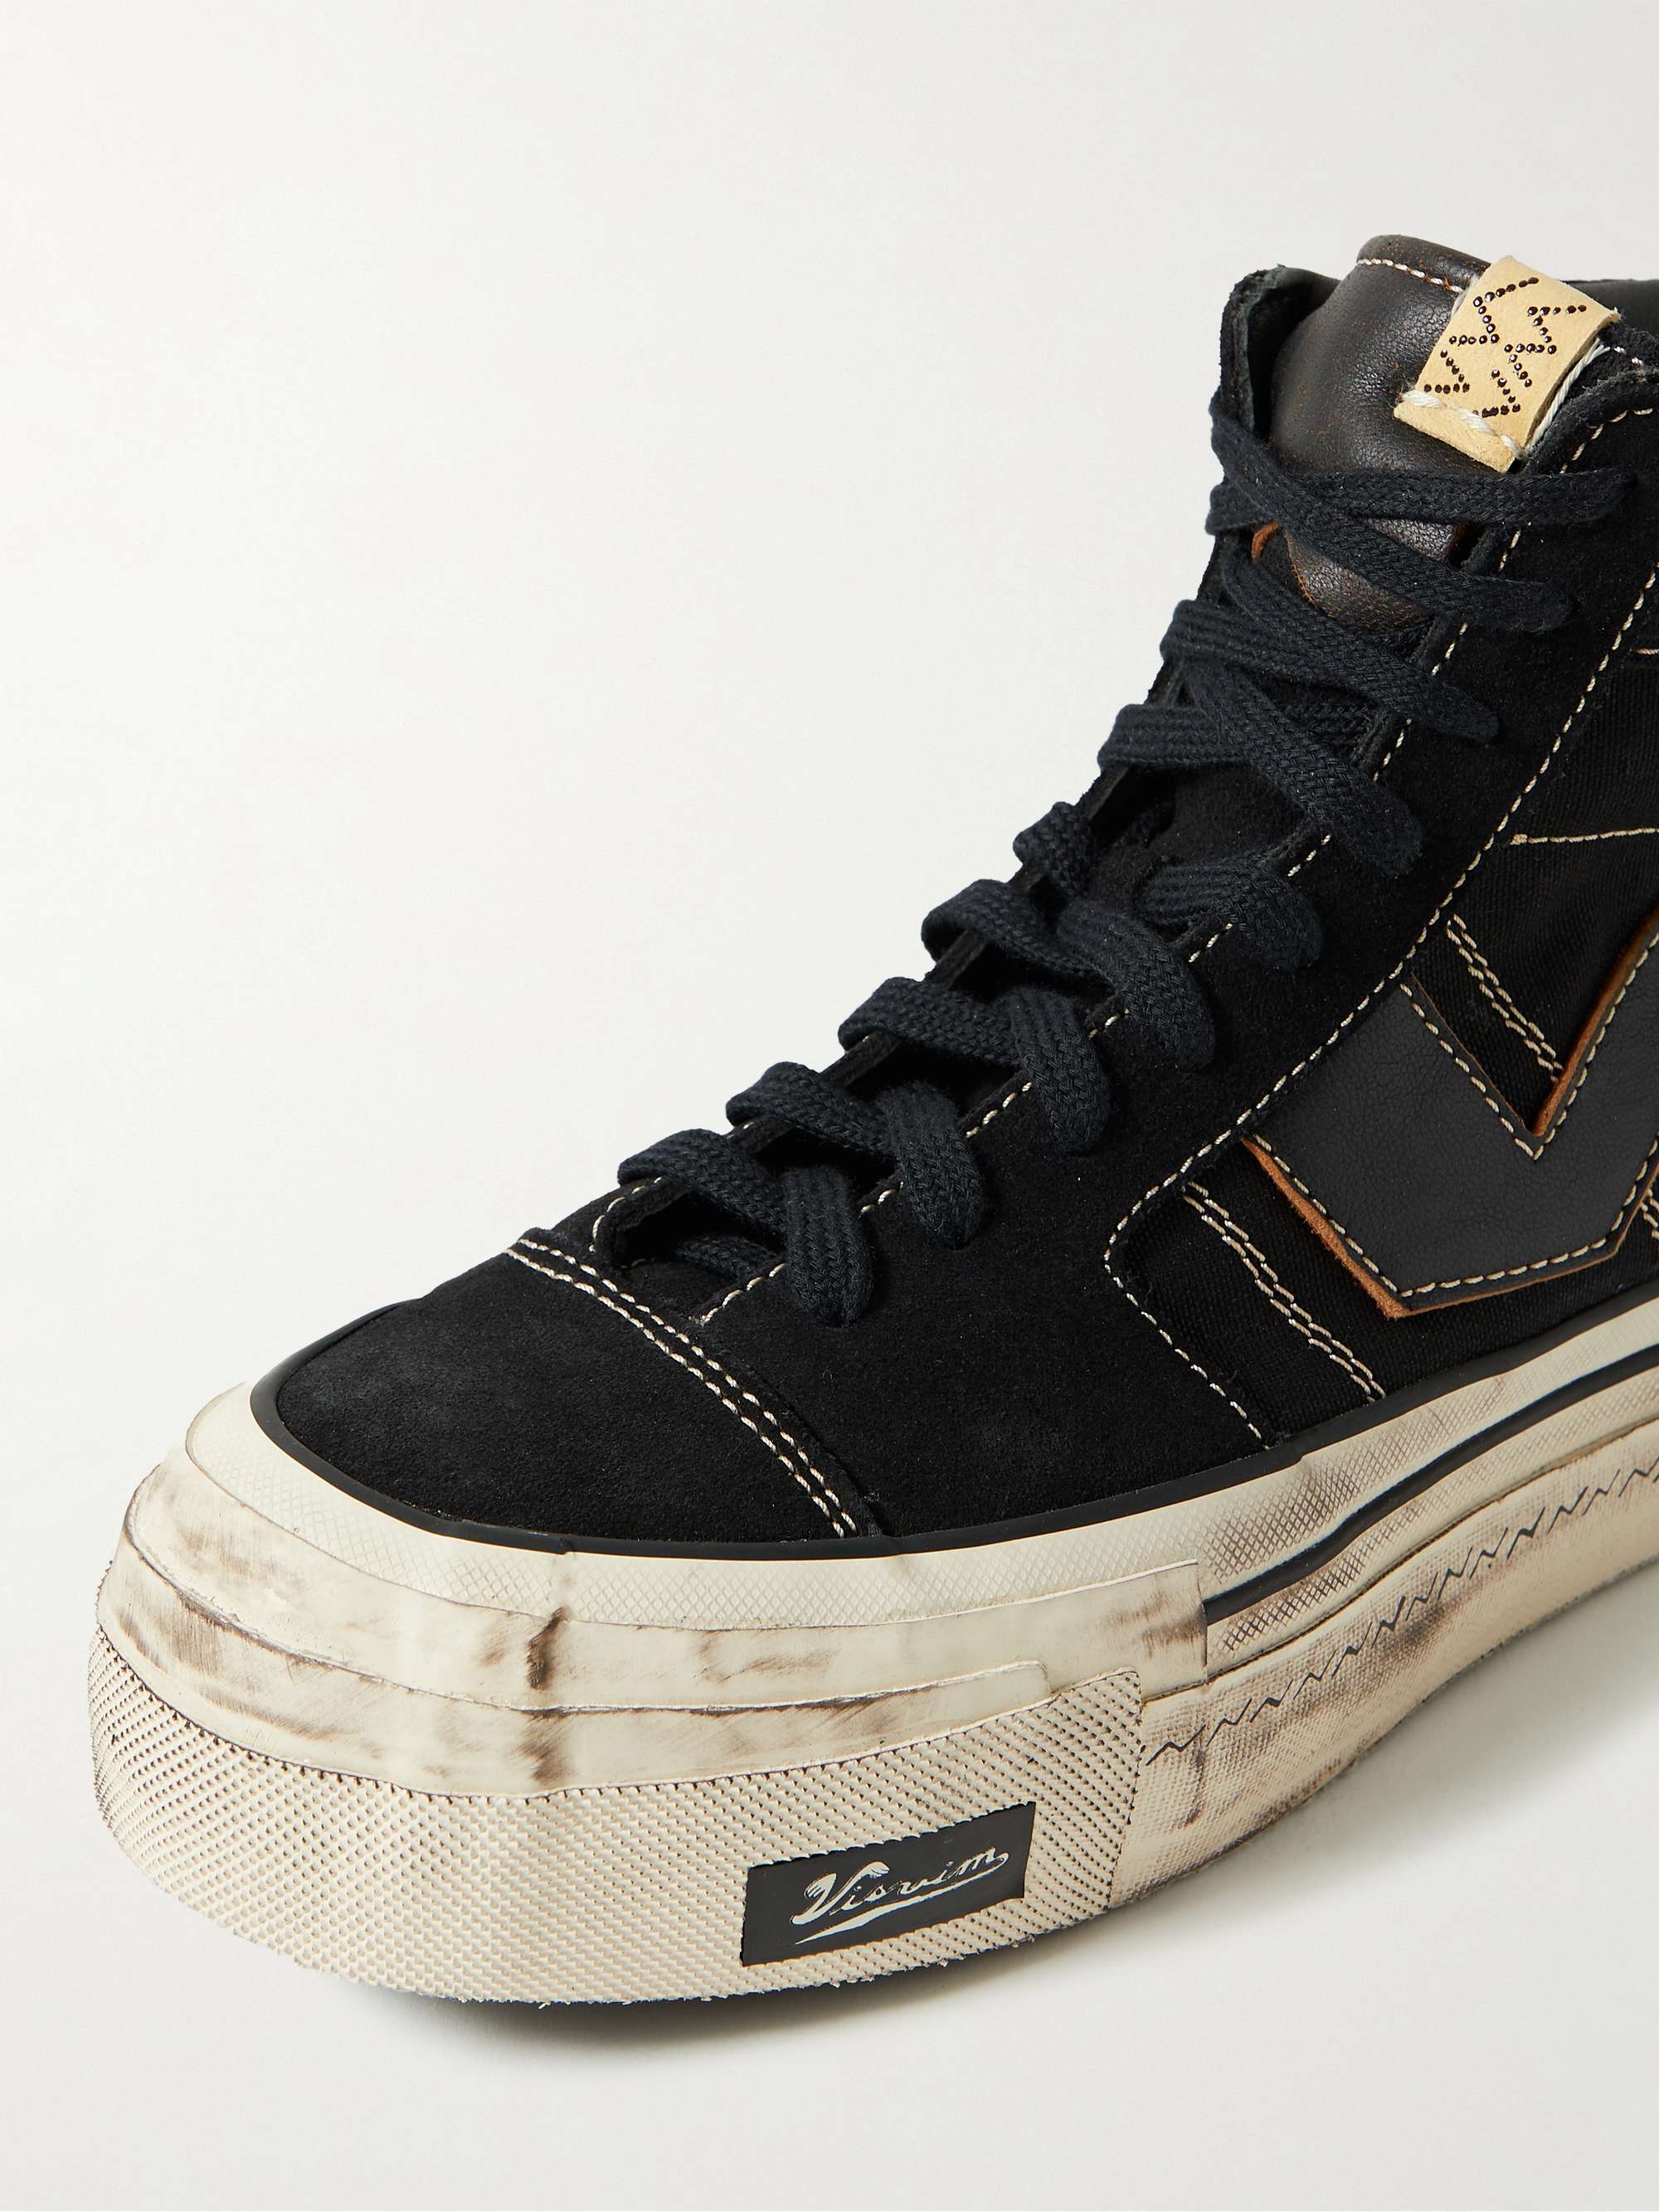 VISVIM Zephyr Hi Distressed Leather-Trimmed Cotton-Canvas High-Top Sneakers